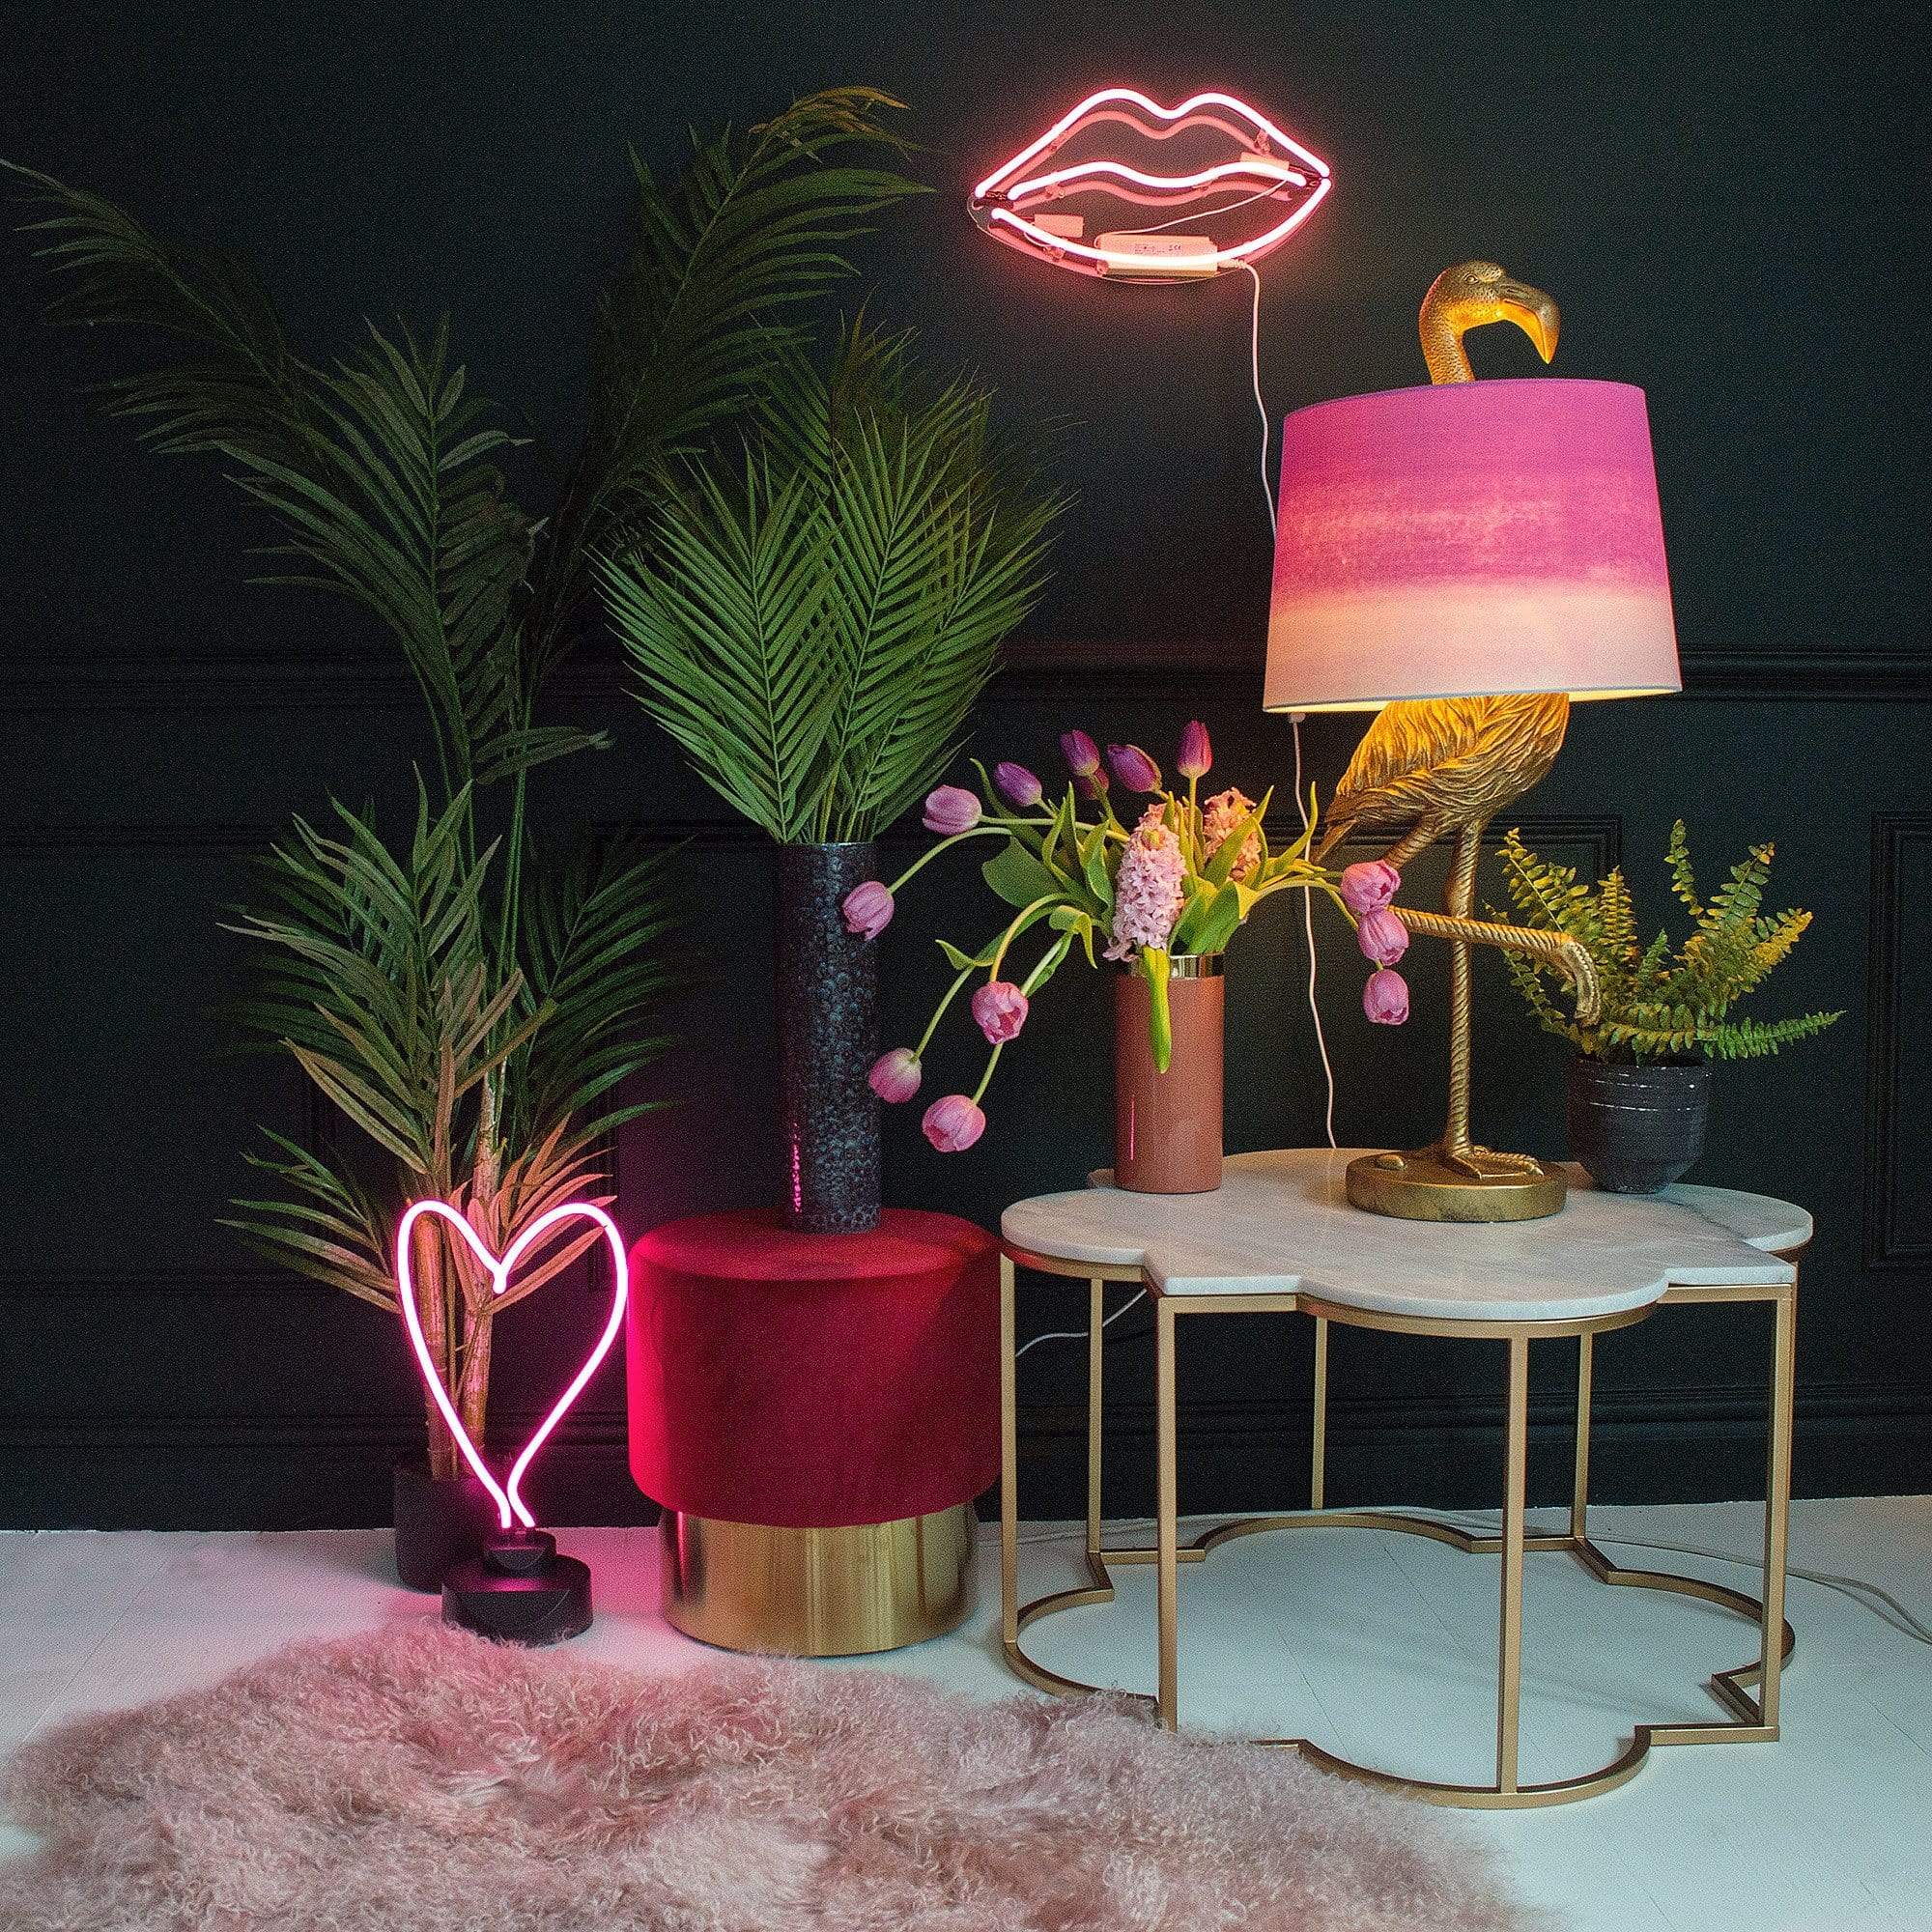 Pink Neon Heart Light With Stand